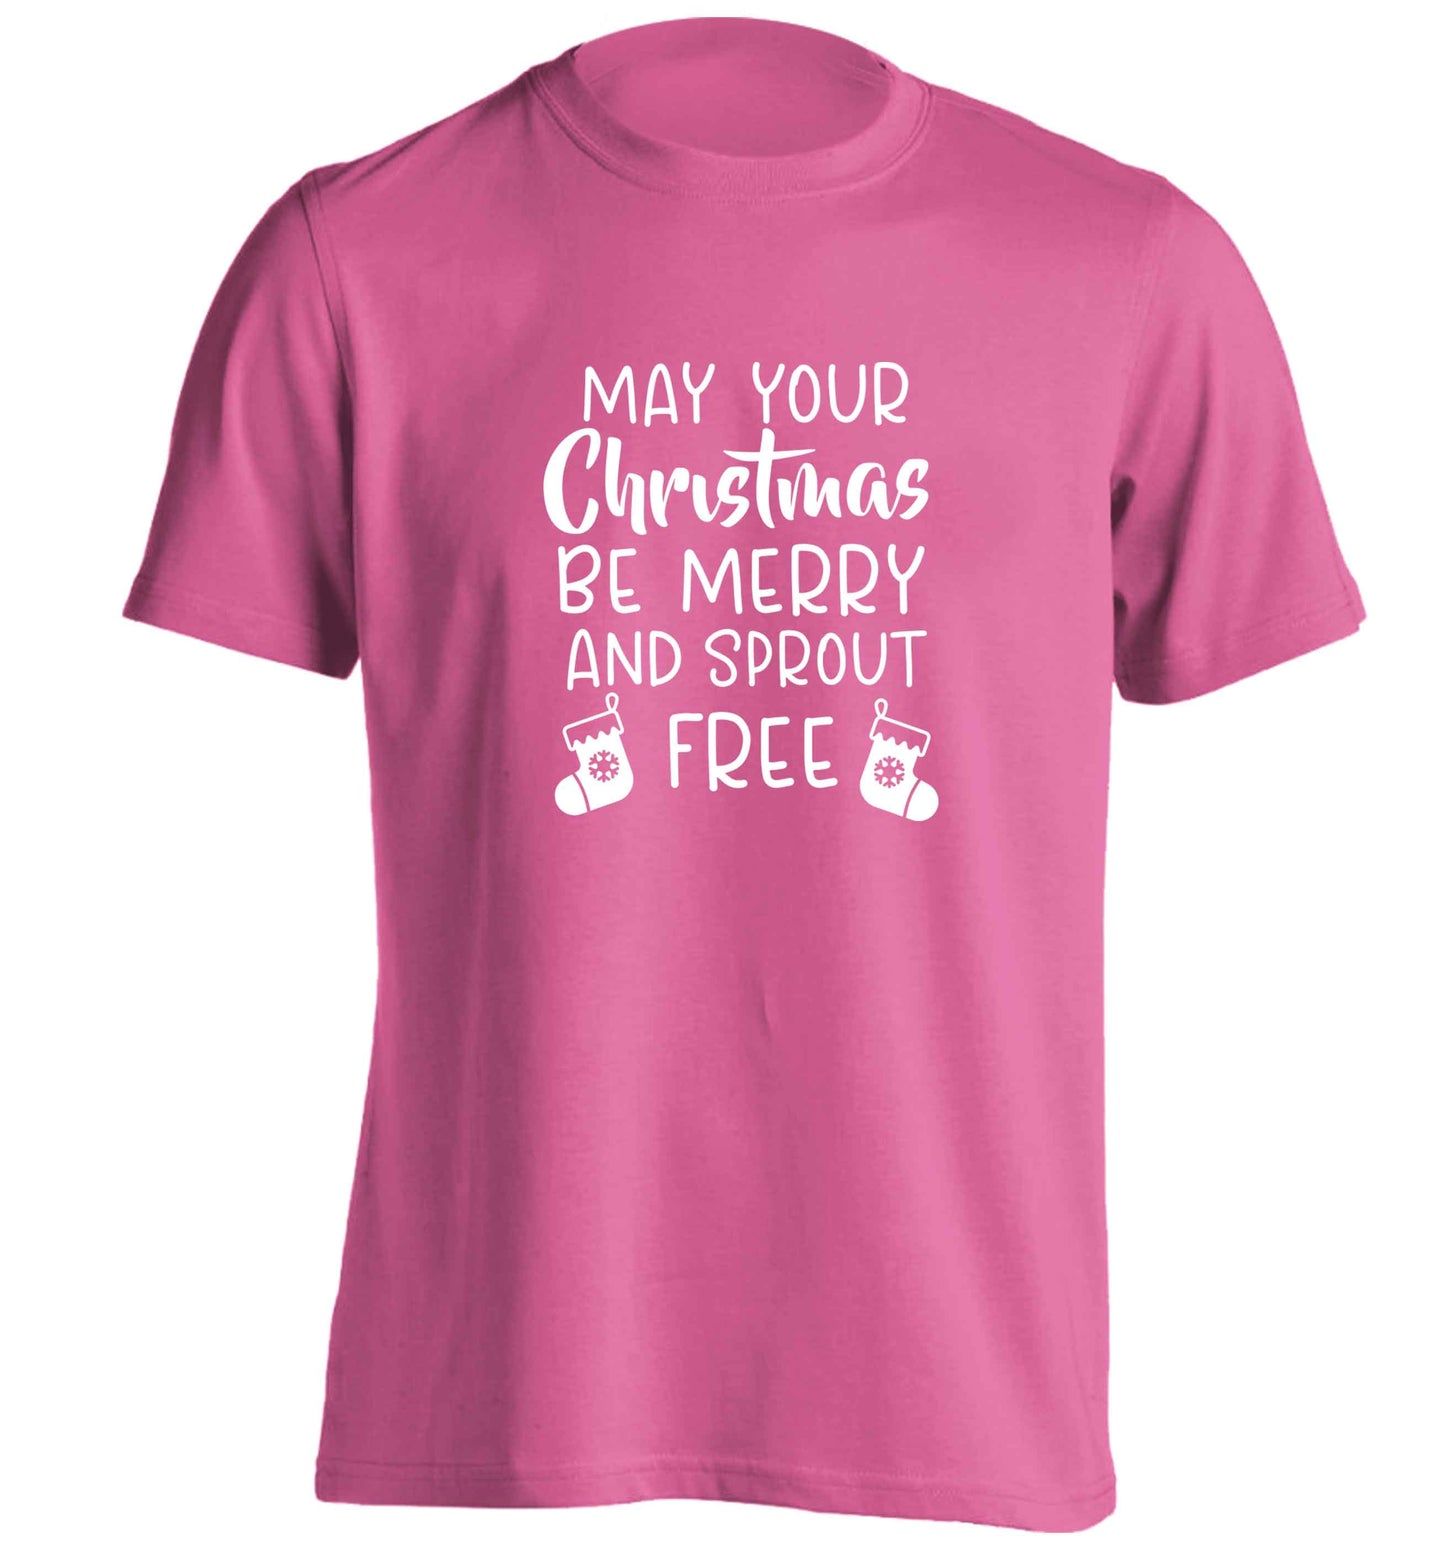 May your Christmas be merry and sprout free adults unisex pink Tshirt 2XL